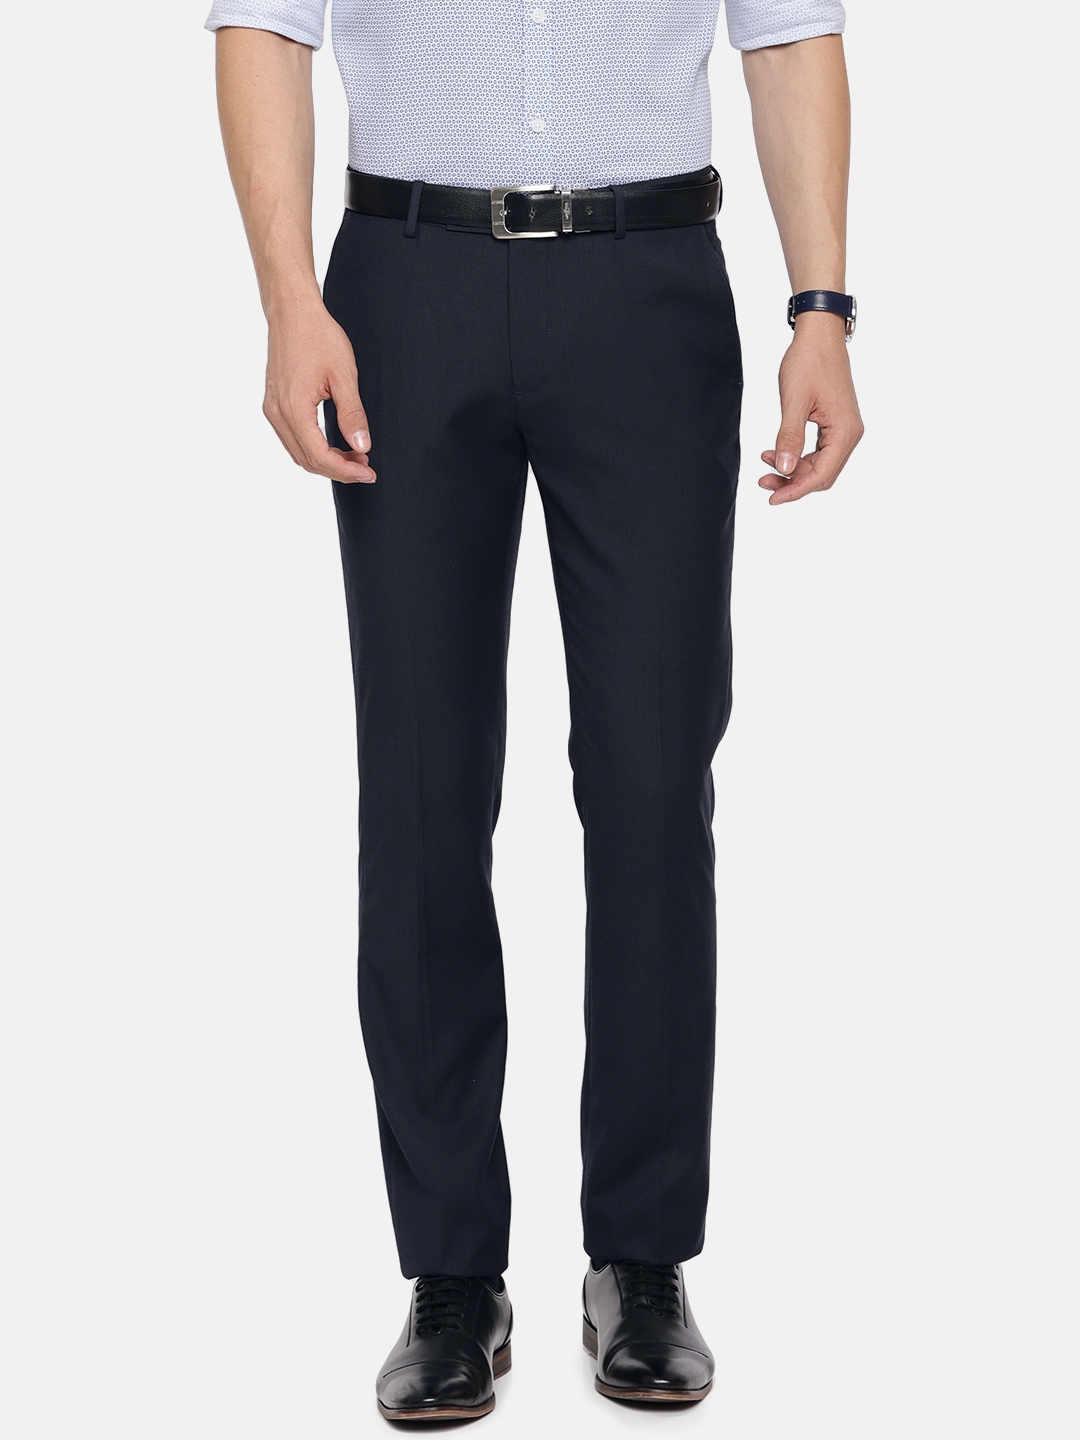 Buy U.S. Polo Assn. Men Navy Blue Slim Fit Solid Formal Trousers ...